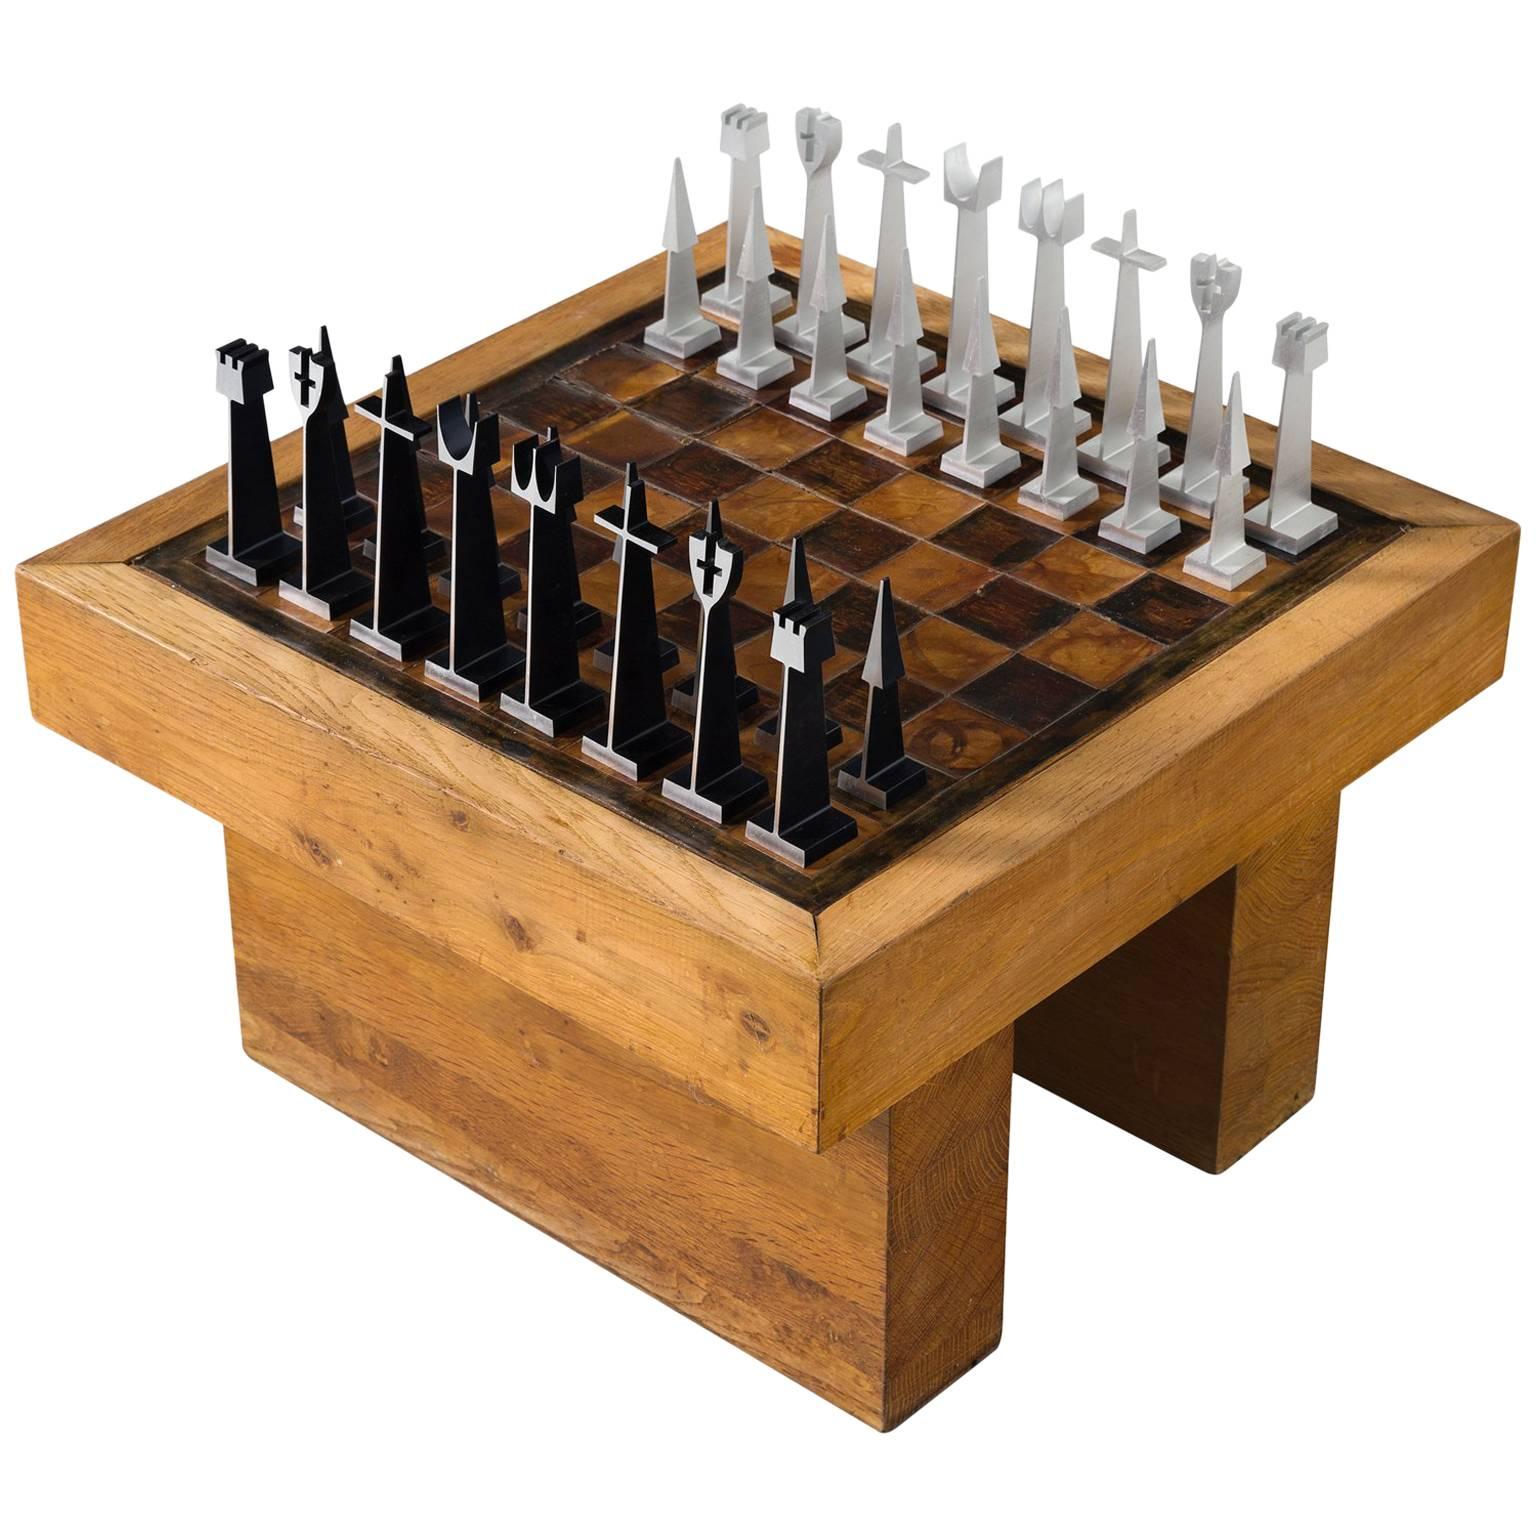 Austin Enterprises Aluminum Chess Game and Table in Leather